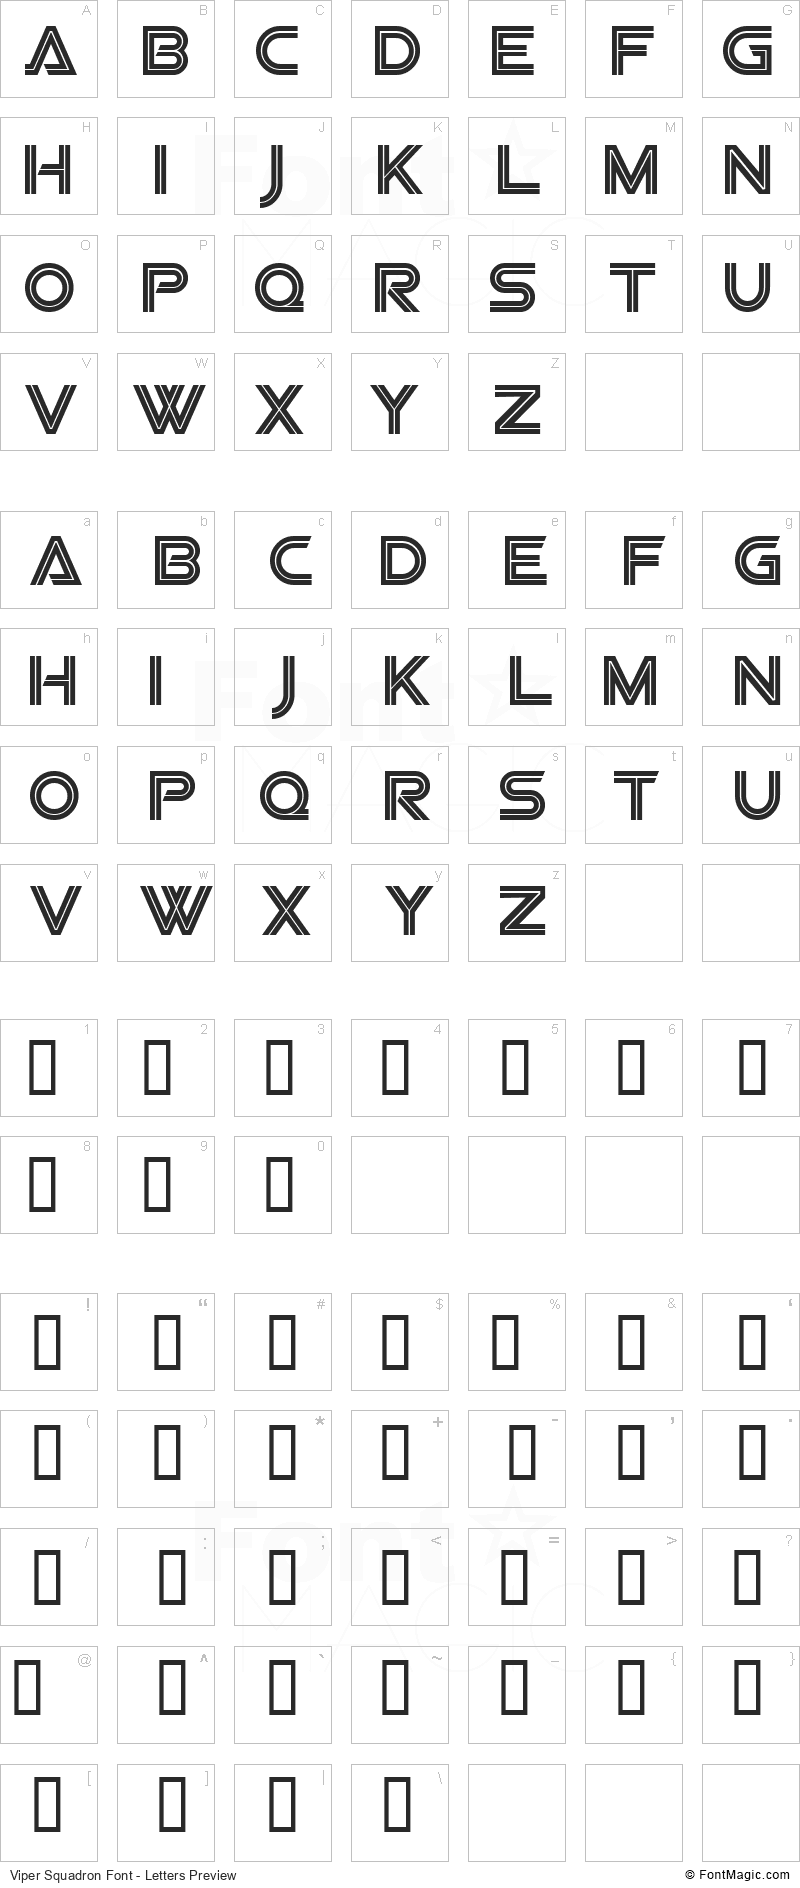 Viper Squadron Font - All Latters Preview Chart